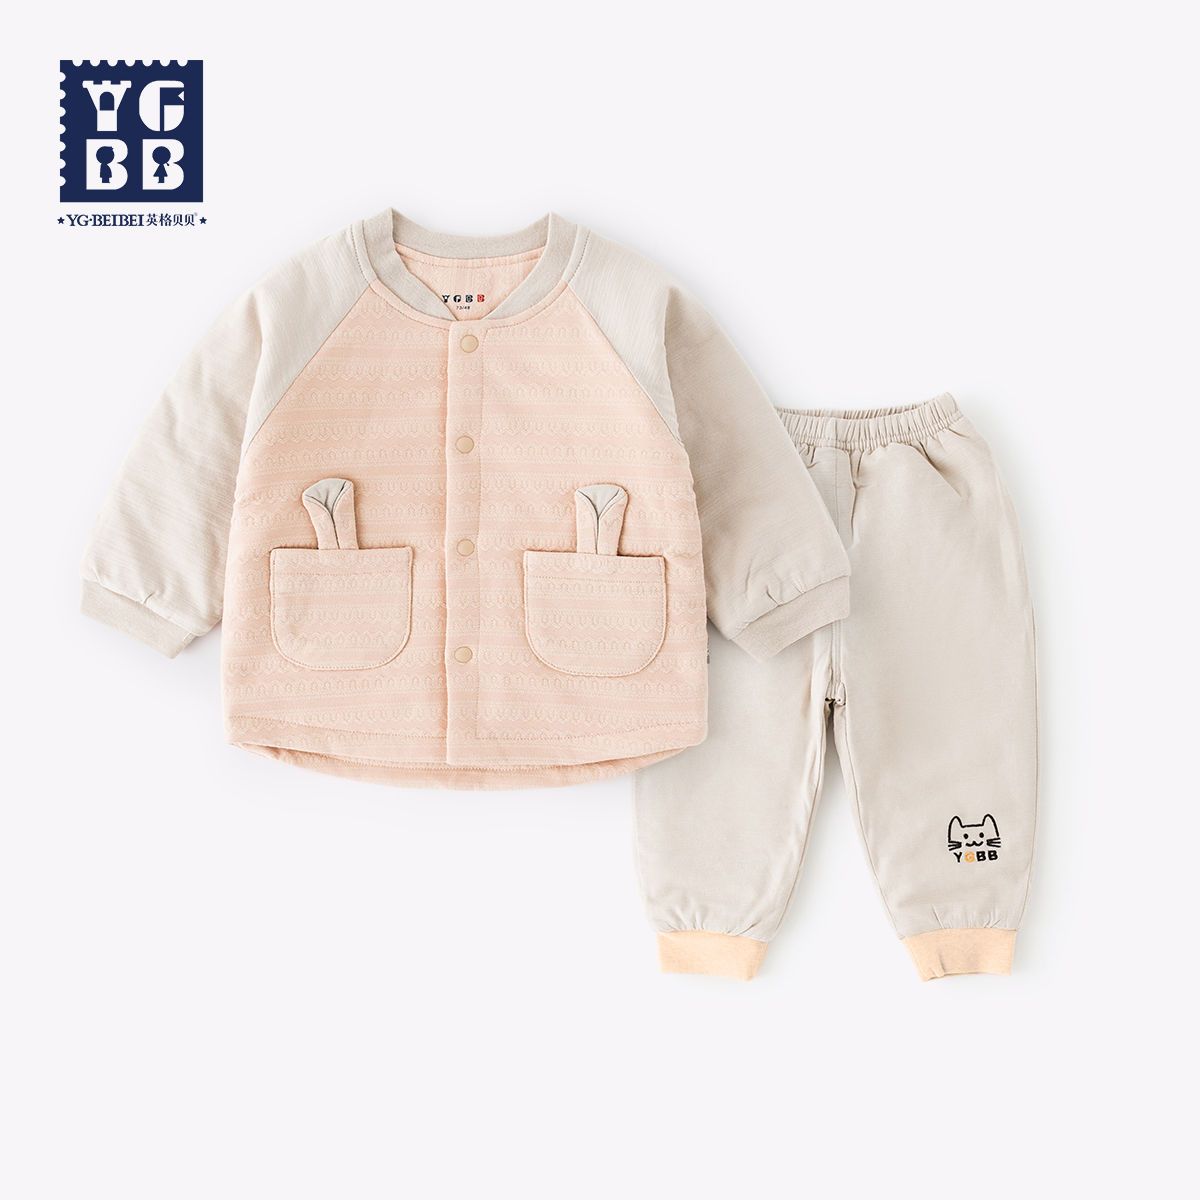 [39 grabs] Yingge Beibei male and female baby thin quilted suit 0-6 years old children's clothes going out two-piece set